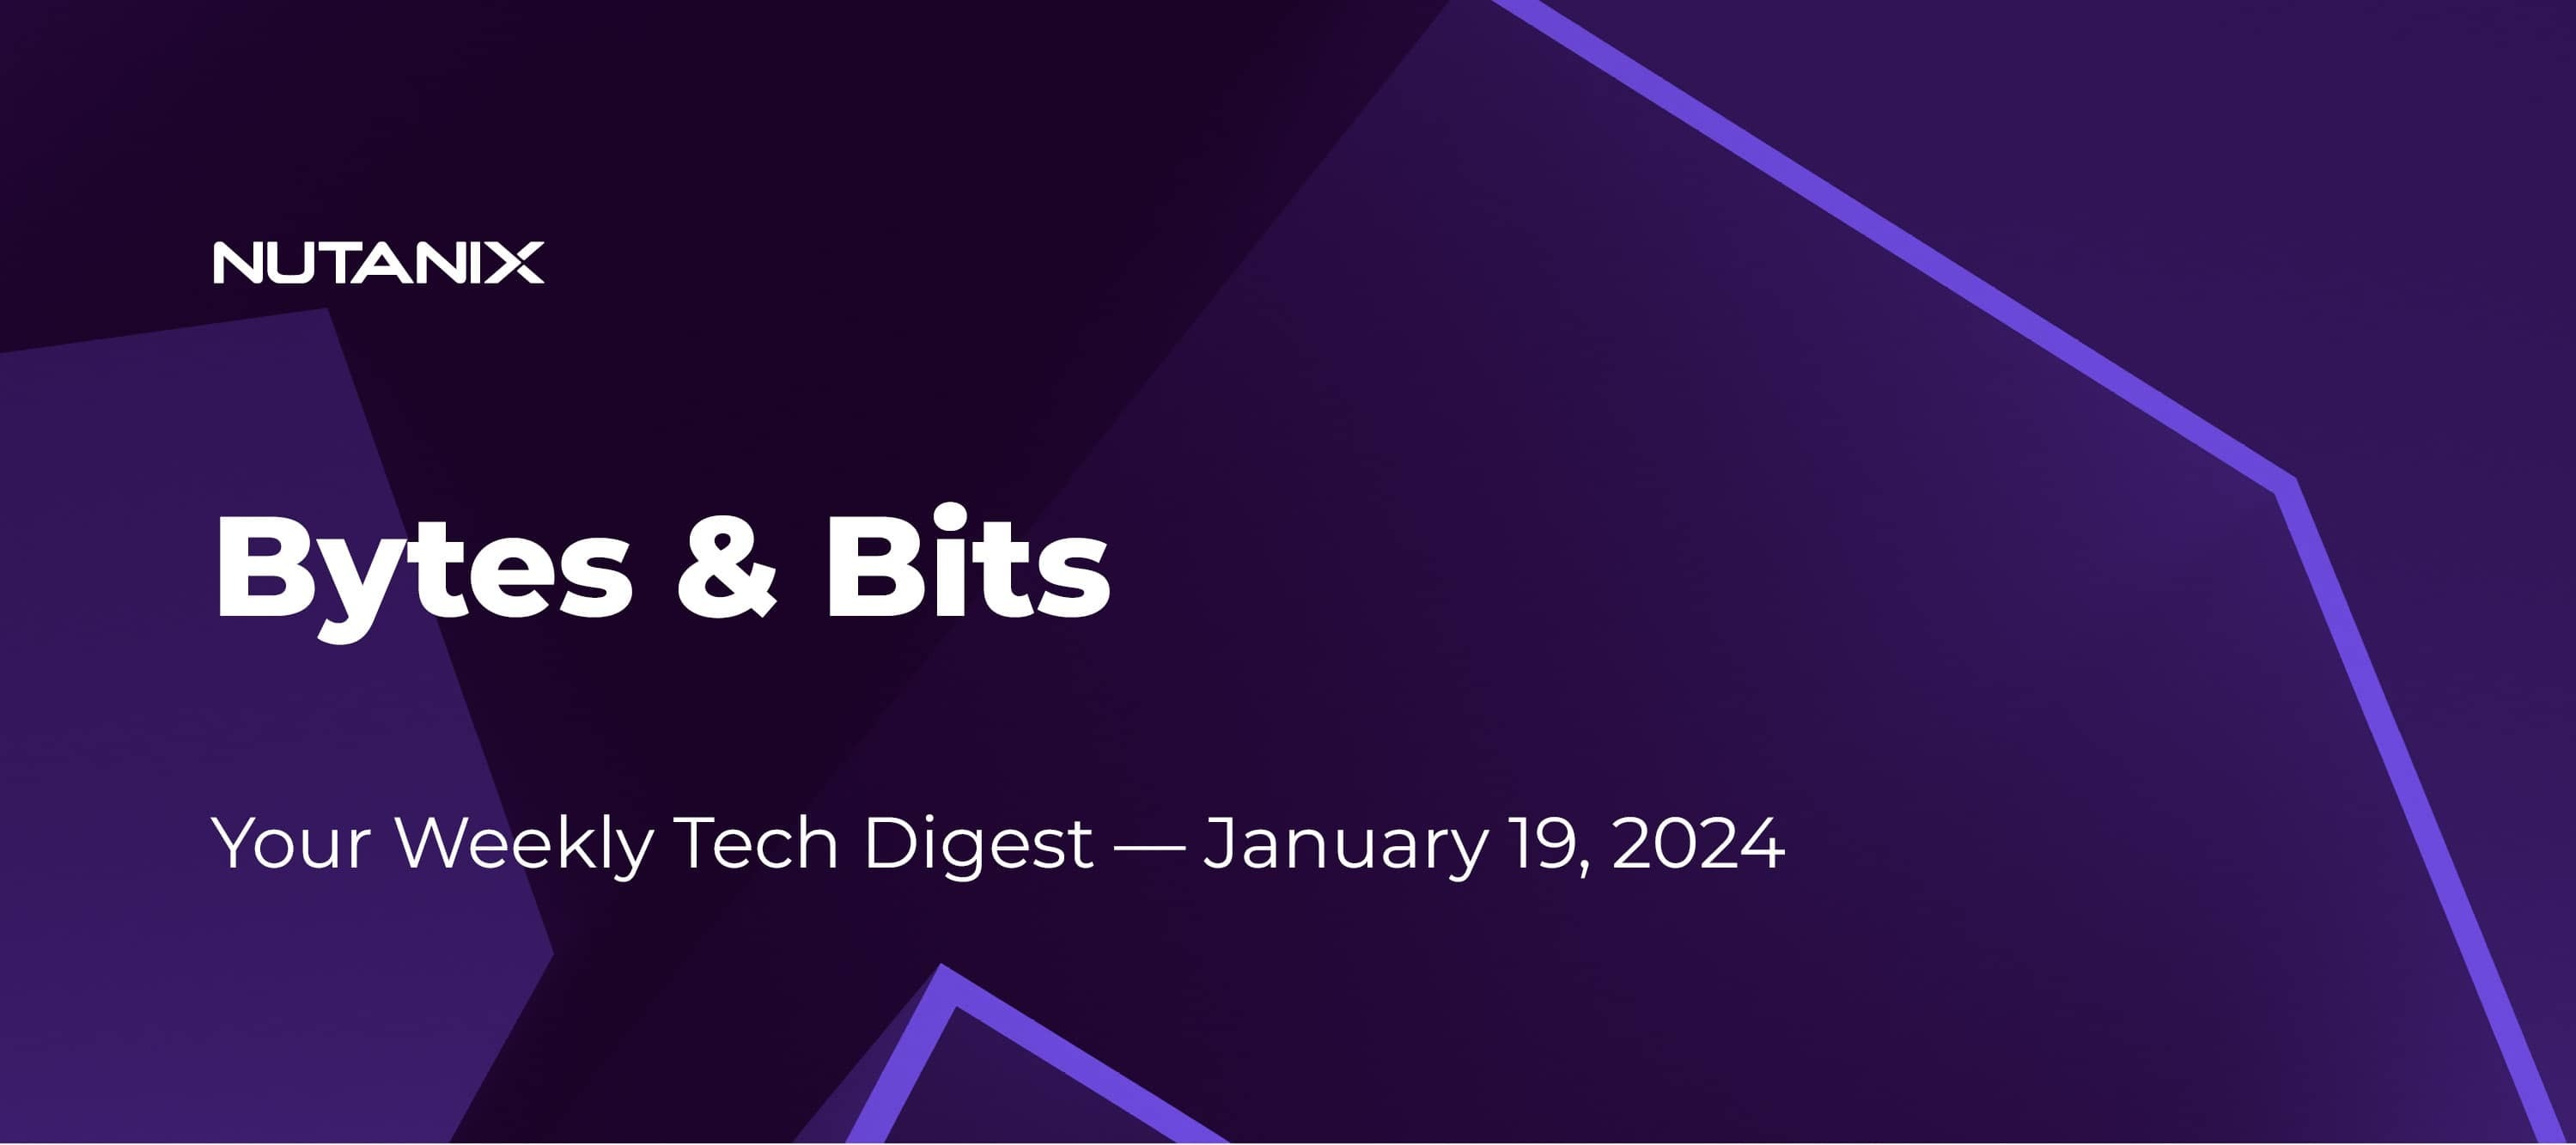 Bytes & Bits: Your Weekly Tech Digest — January 19, 2024